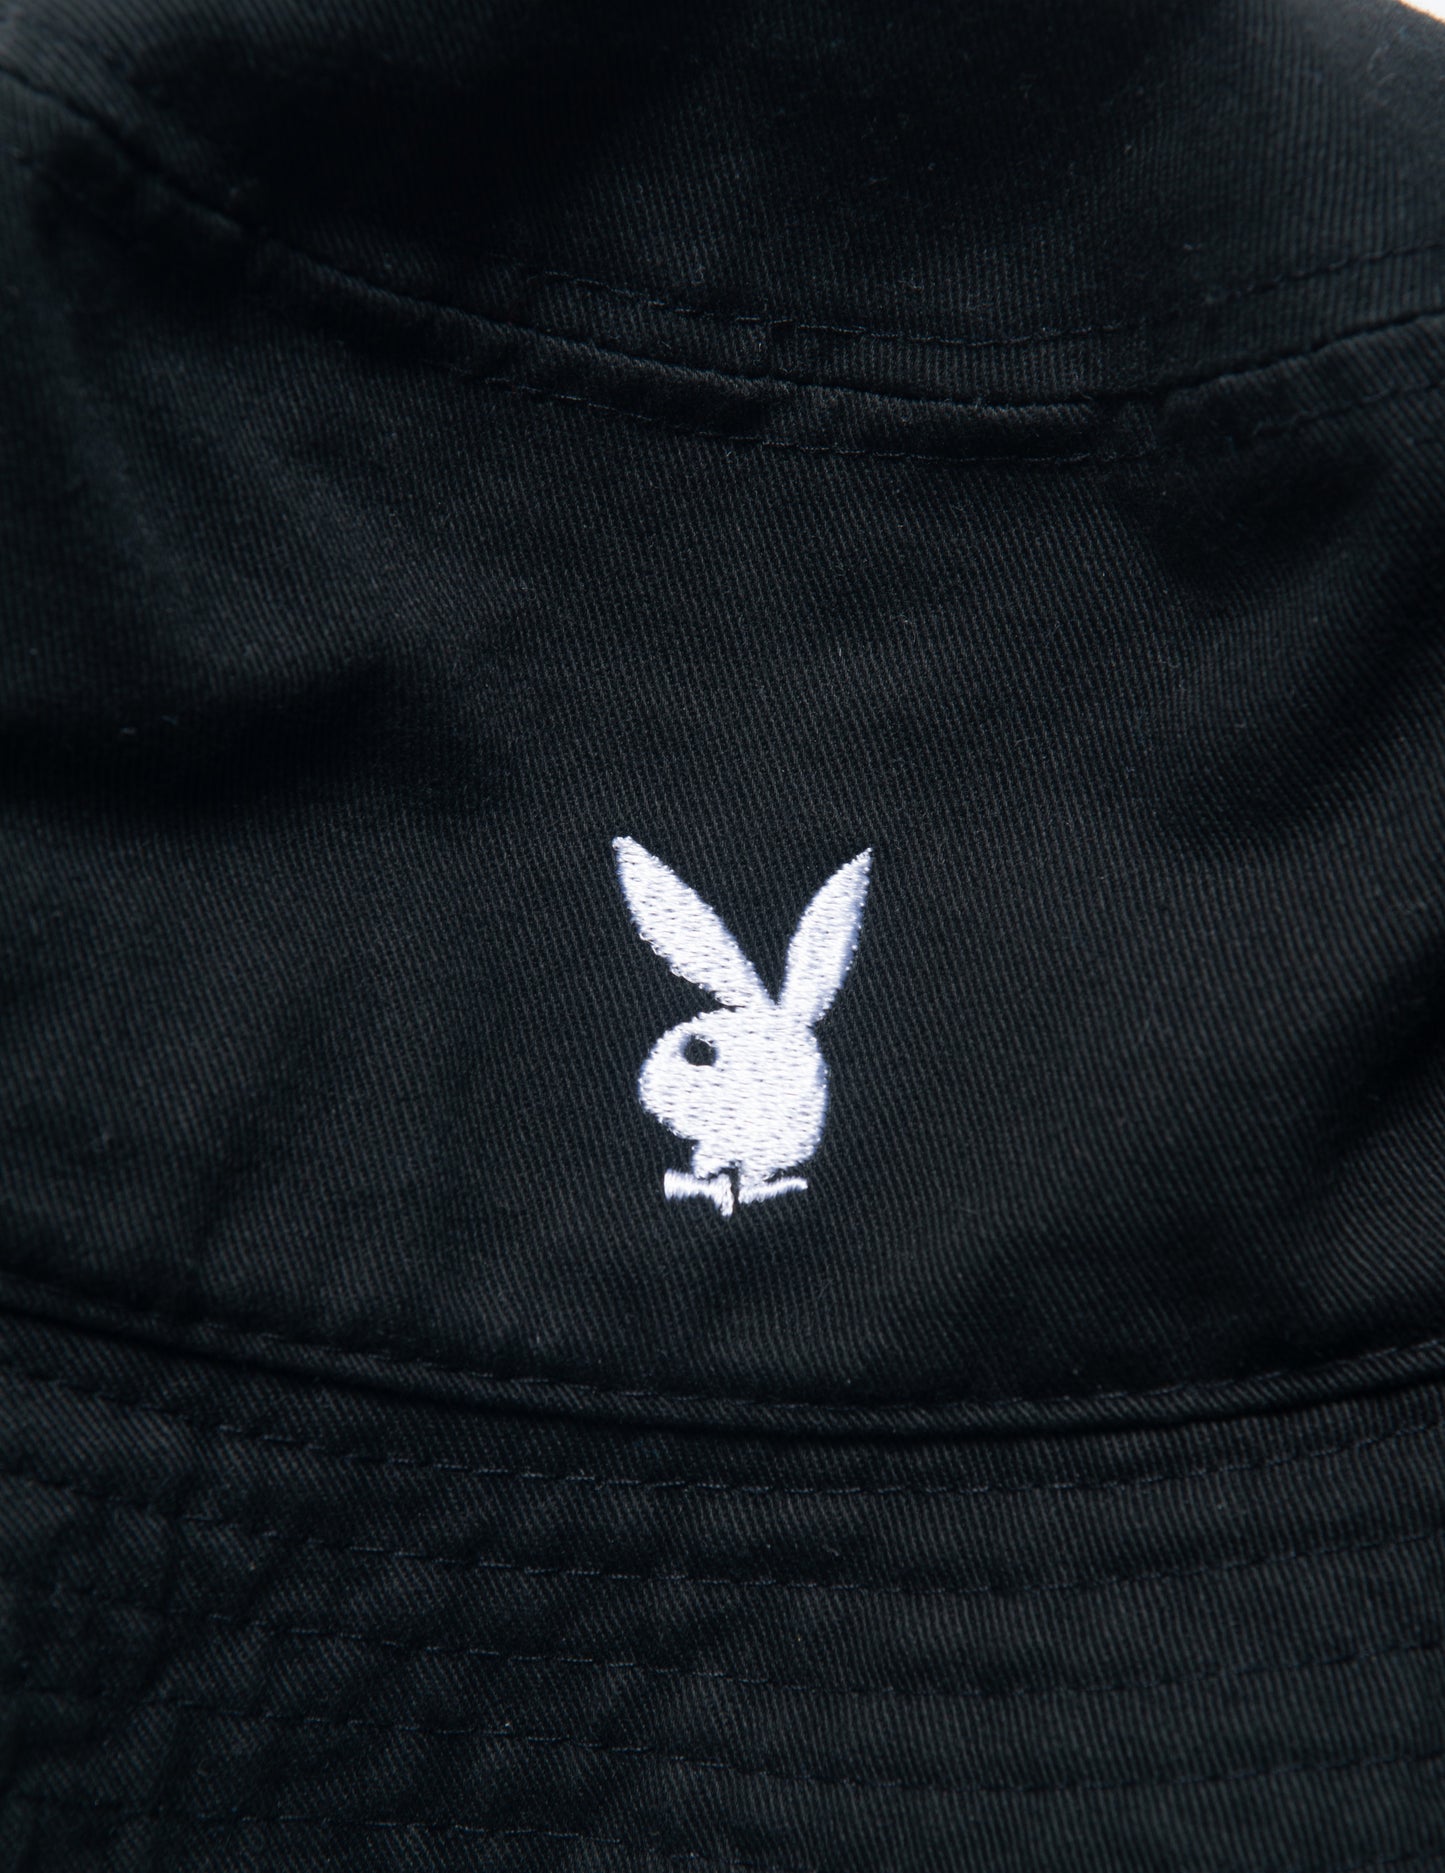 PLAY BOY x DELUXE HAT WHITE